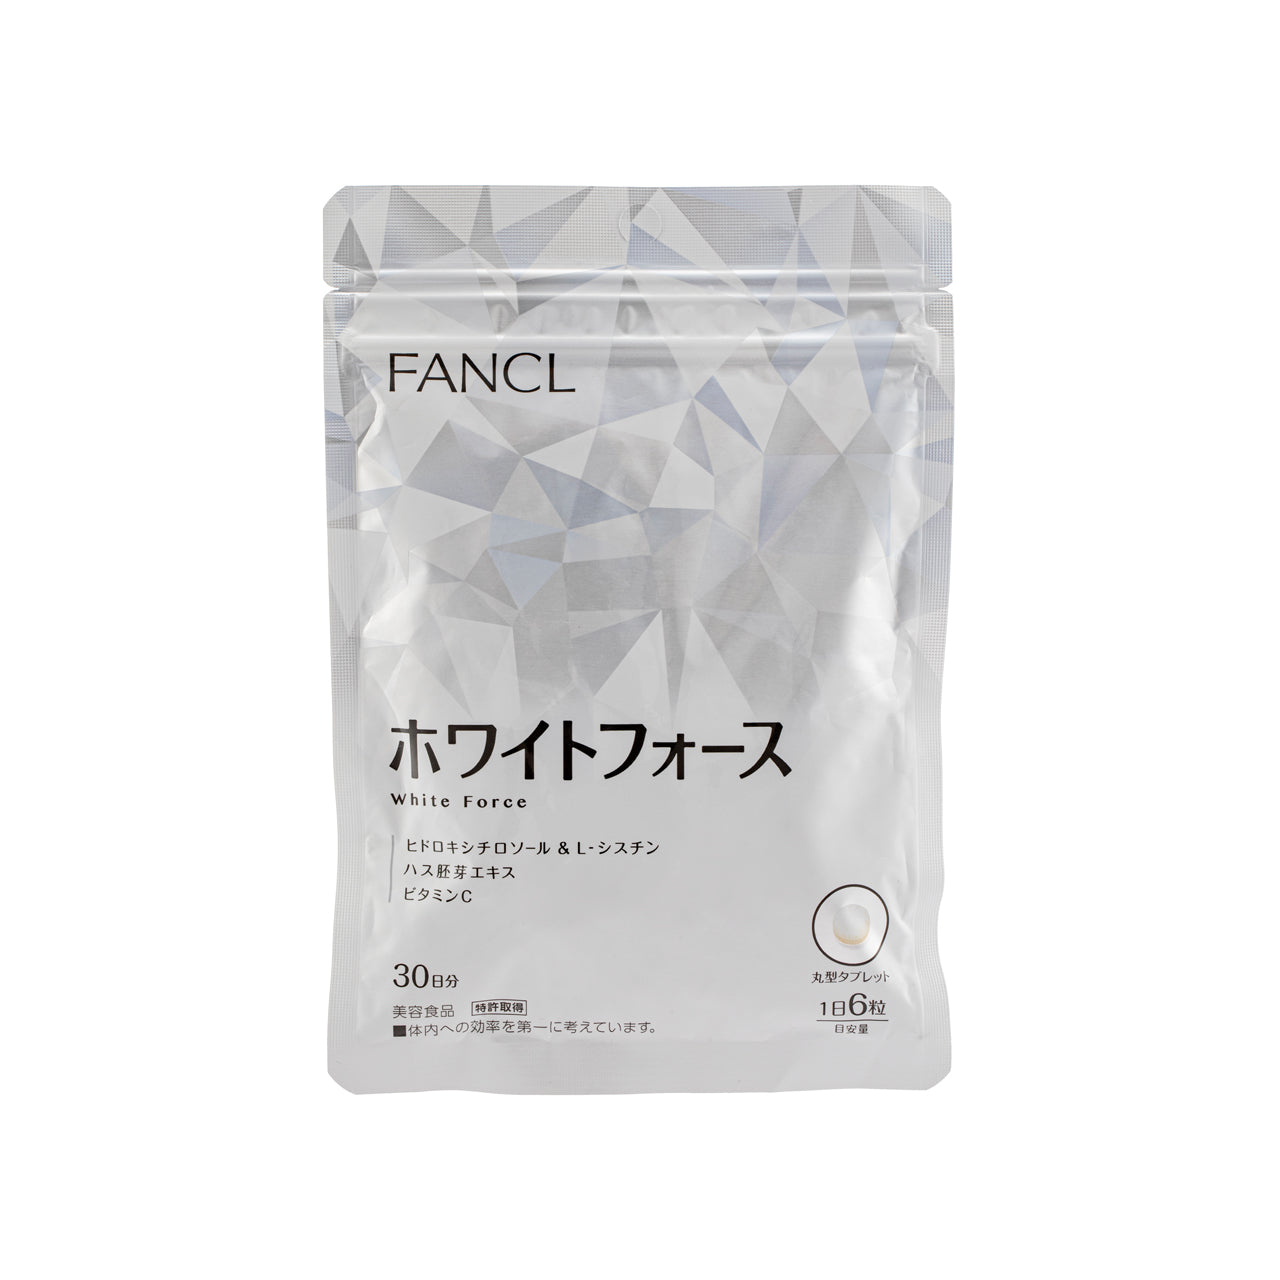 Fancl White Force For 30 Days 180 Tablets Fancl